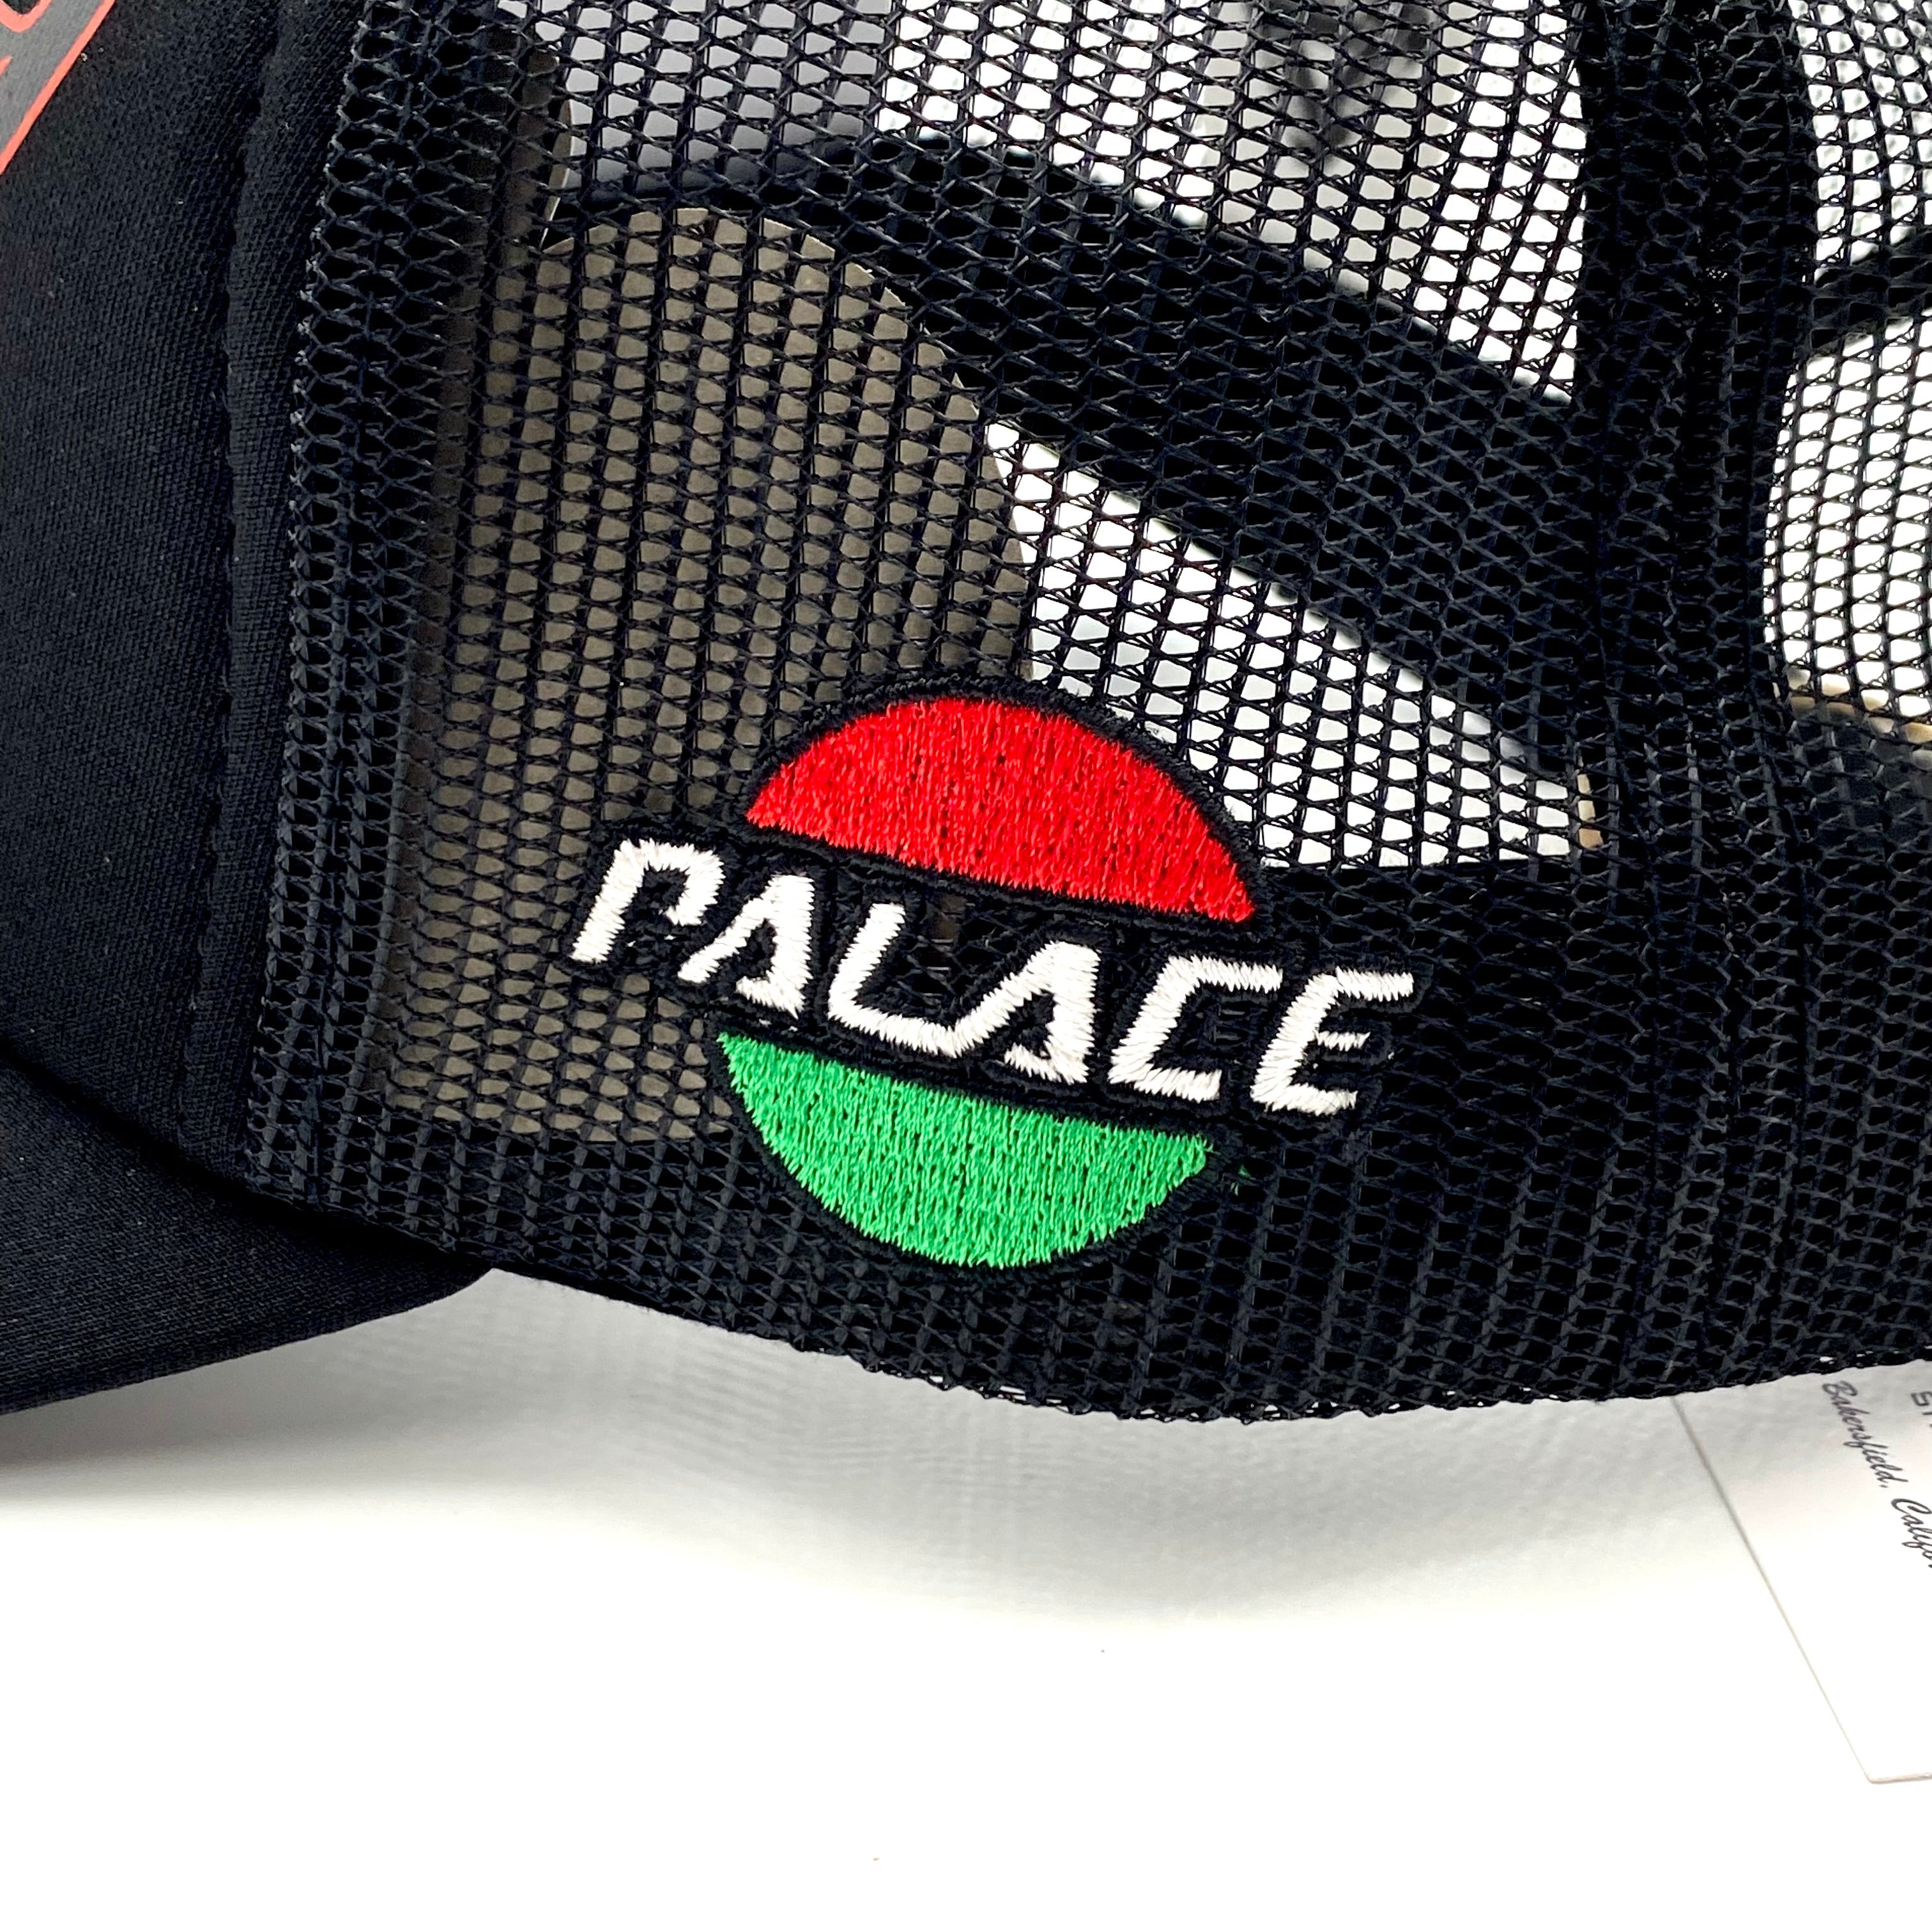 2023 palace p-rx trucker snapback hat – cookin aint free